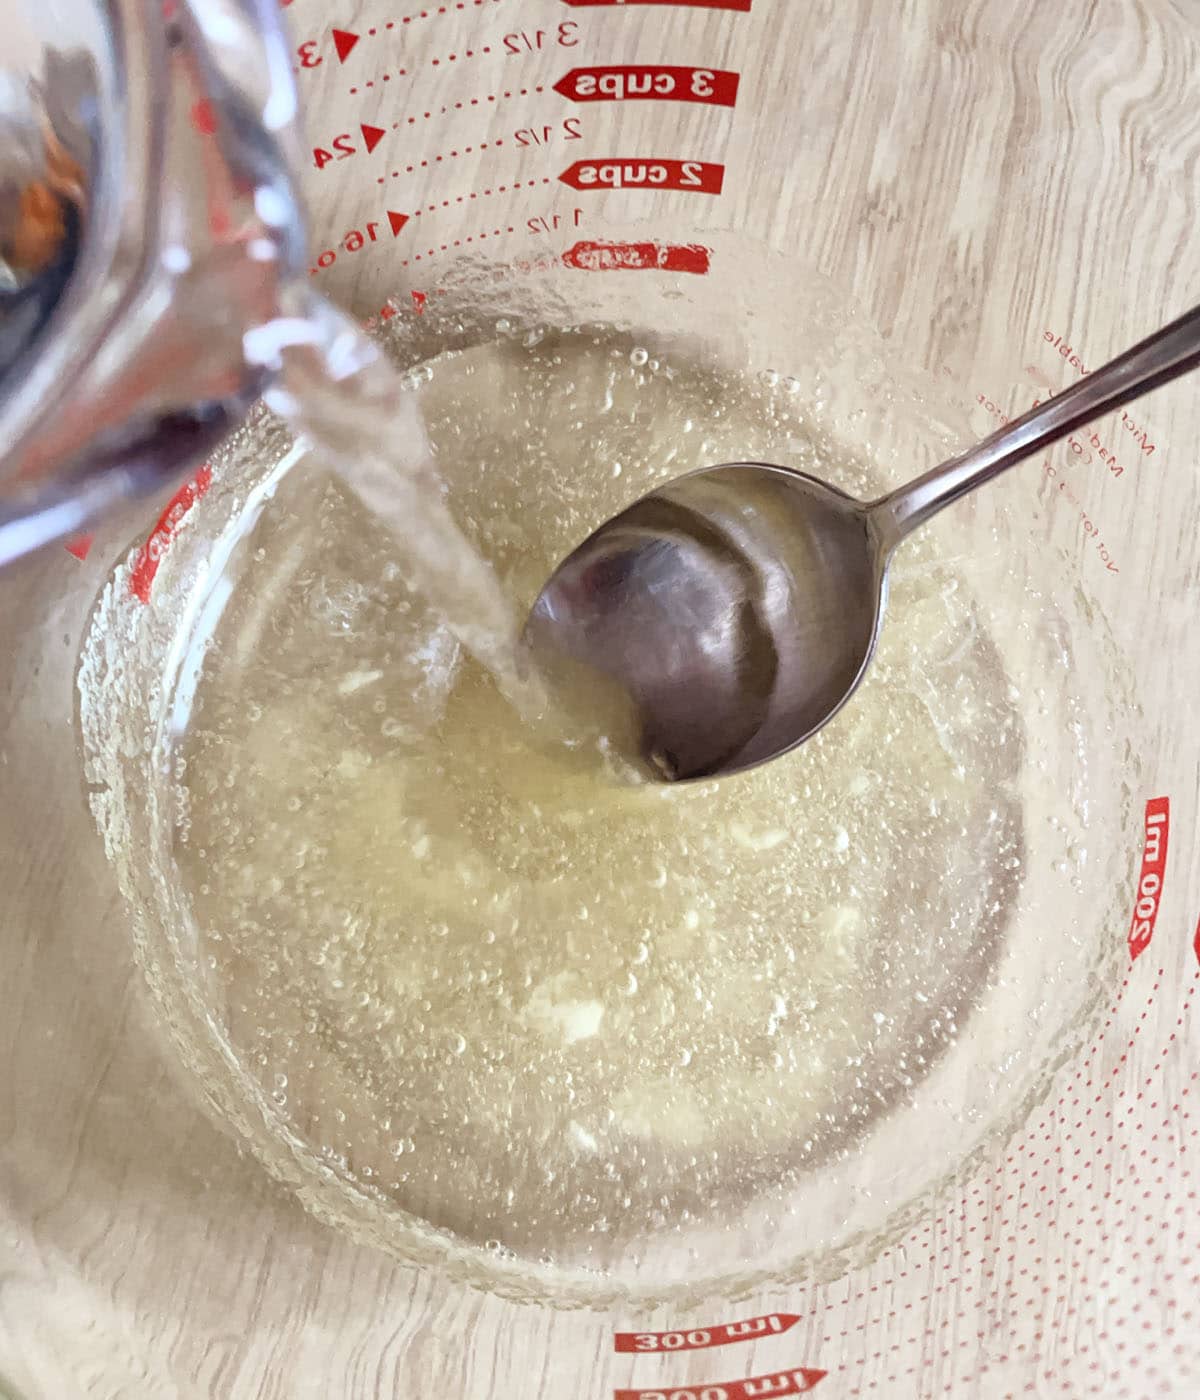 Water being poured into a large measuring cup containing a spoon and a clear gel.